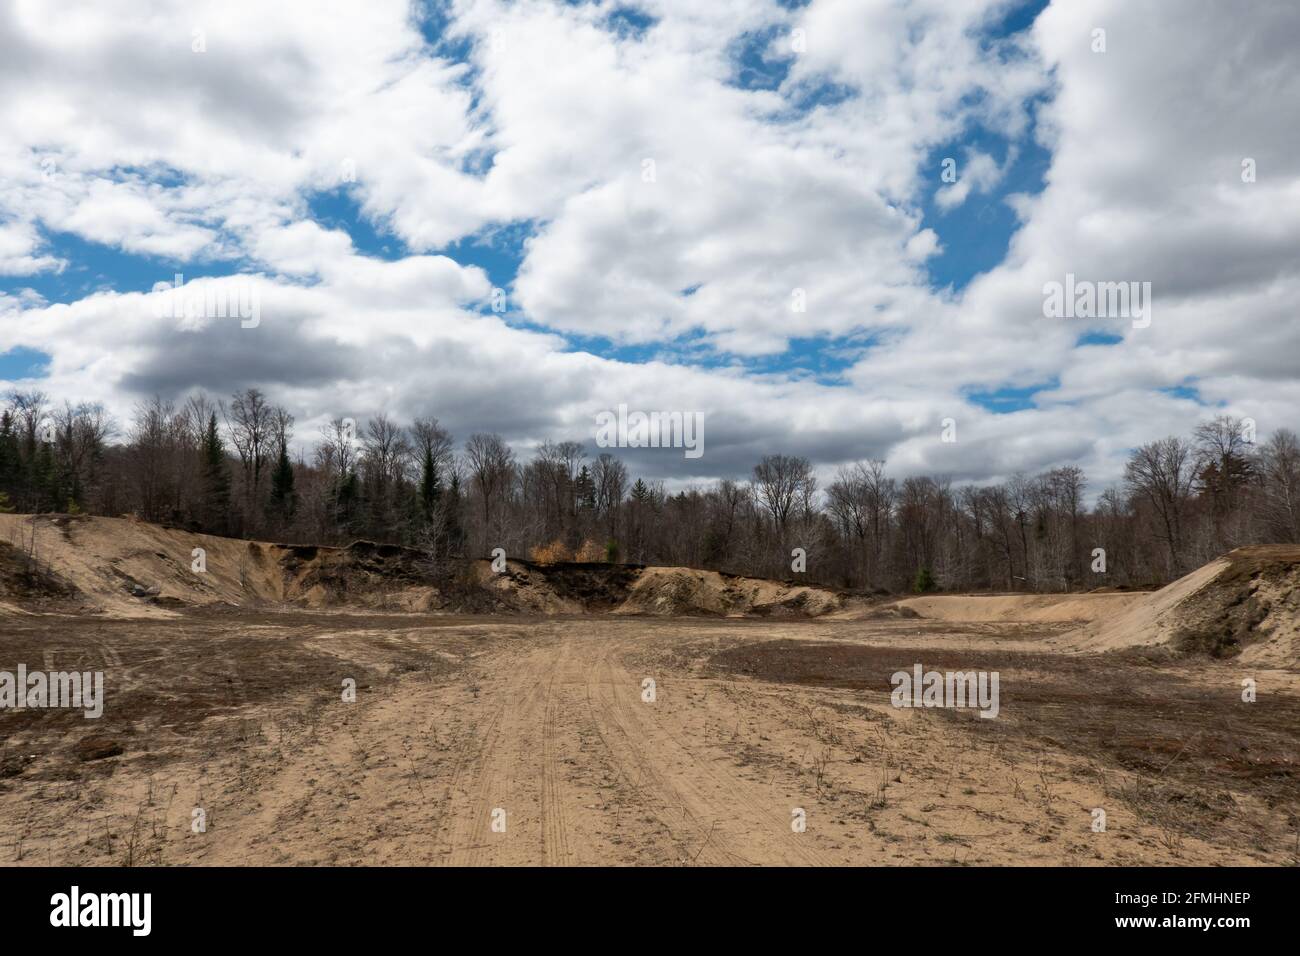 A large sand and gravel pit in the Adirondack Mountains, NY USA with a blue sky and clouds background. Stock Photo